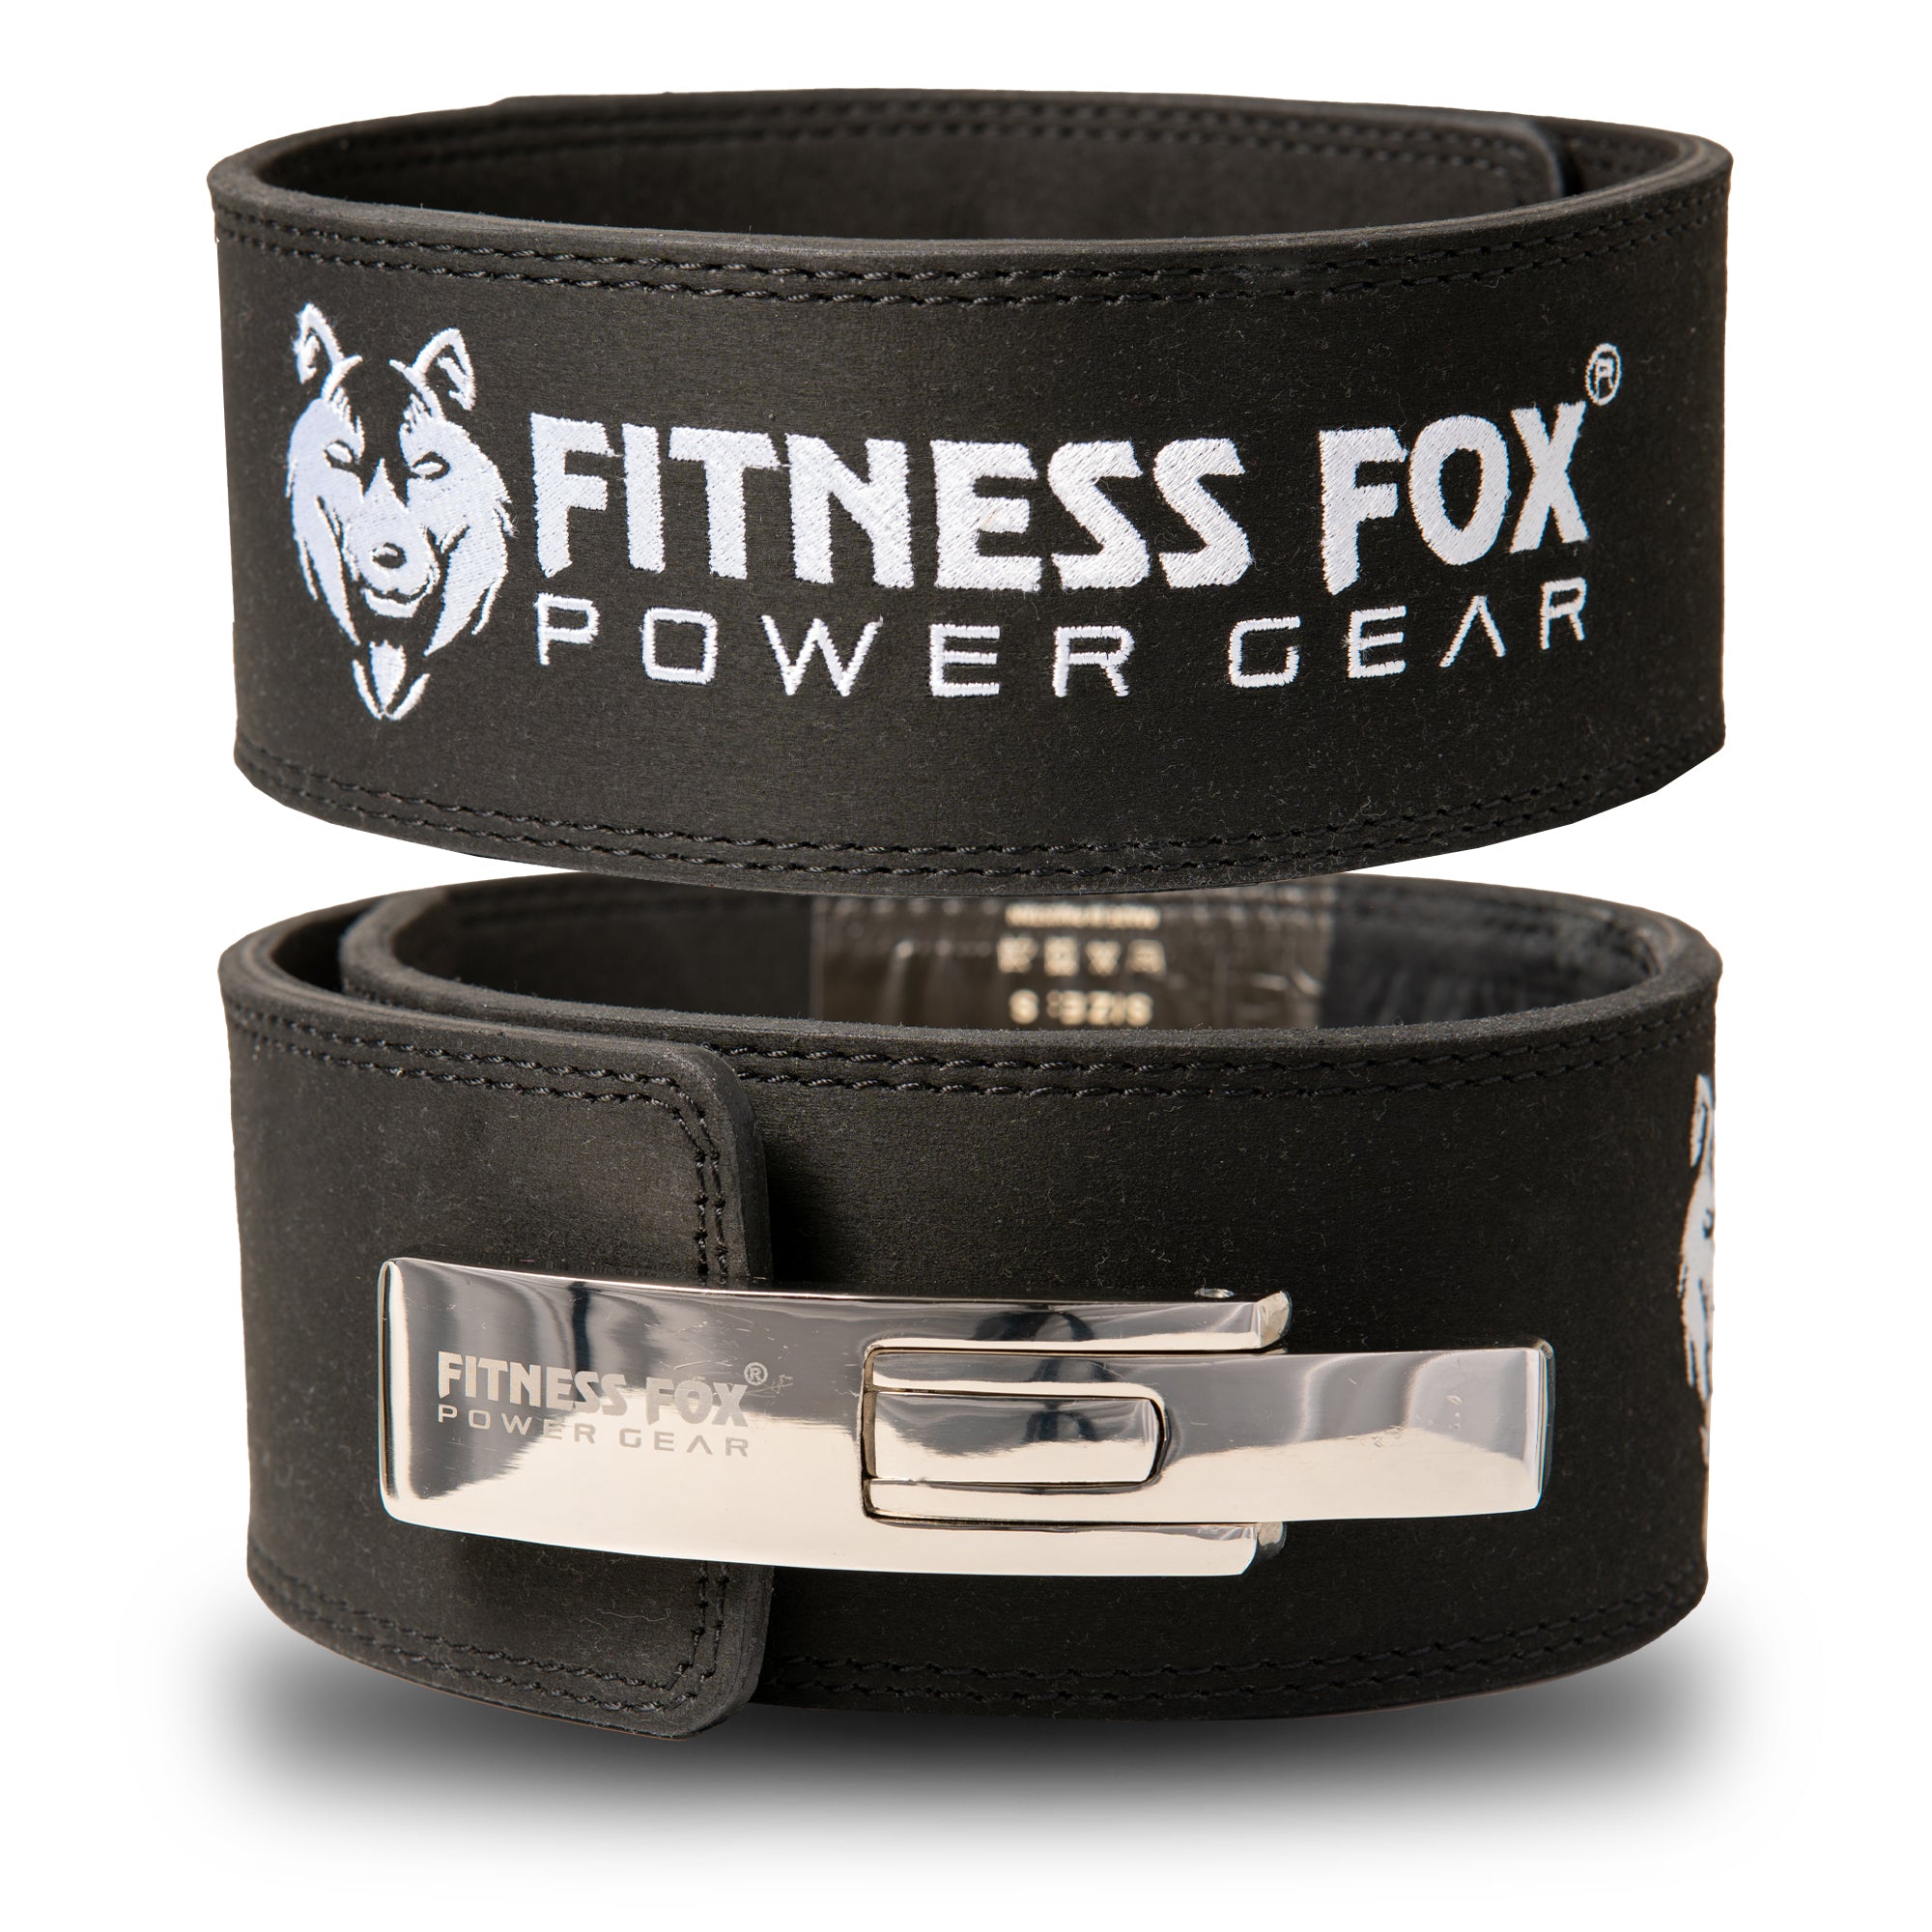 FITNESS FOX 10MM Lever Weightlifting Belt with Suede Leather